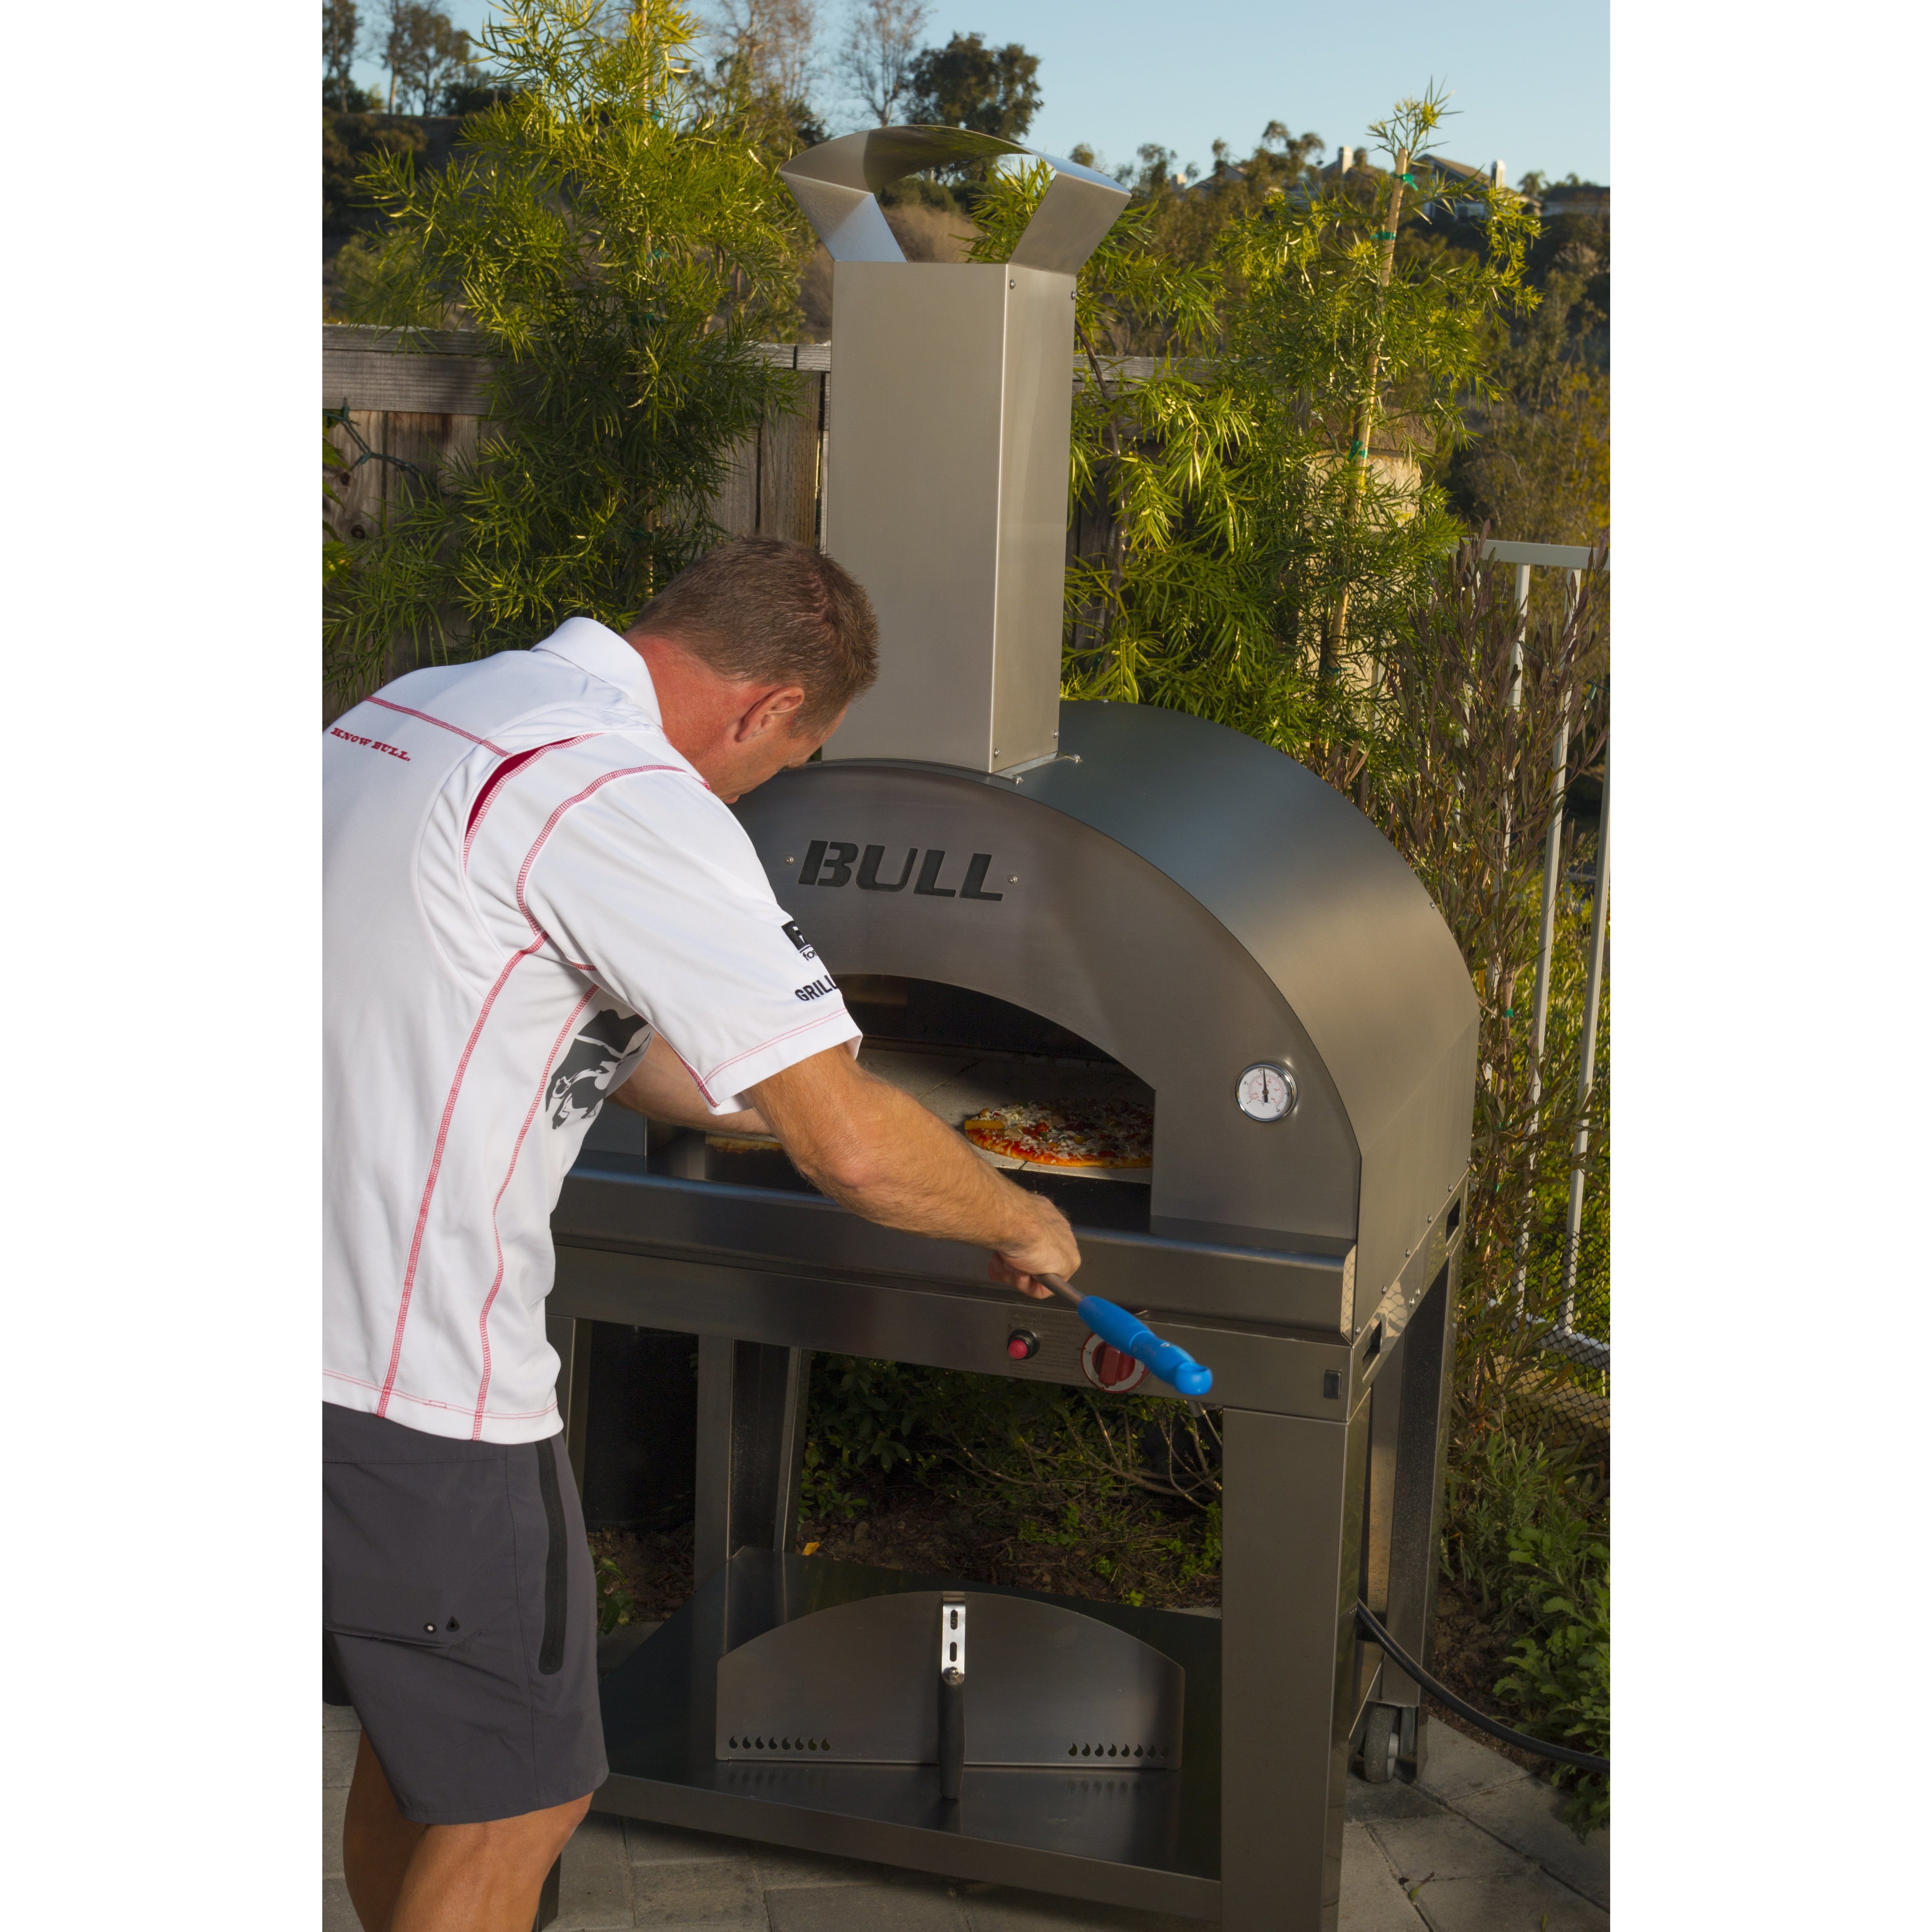 Bull Gas Fired Outdoor Pizza Oven with Cart In Action